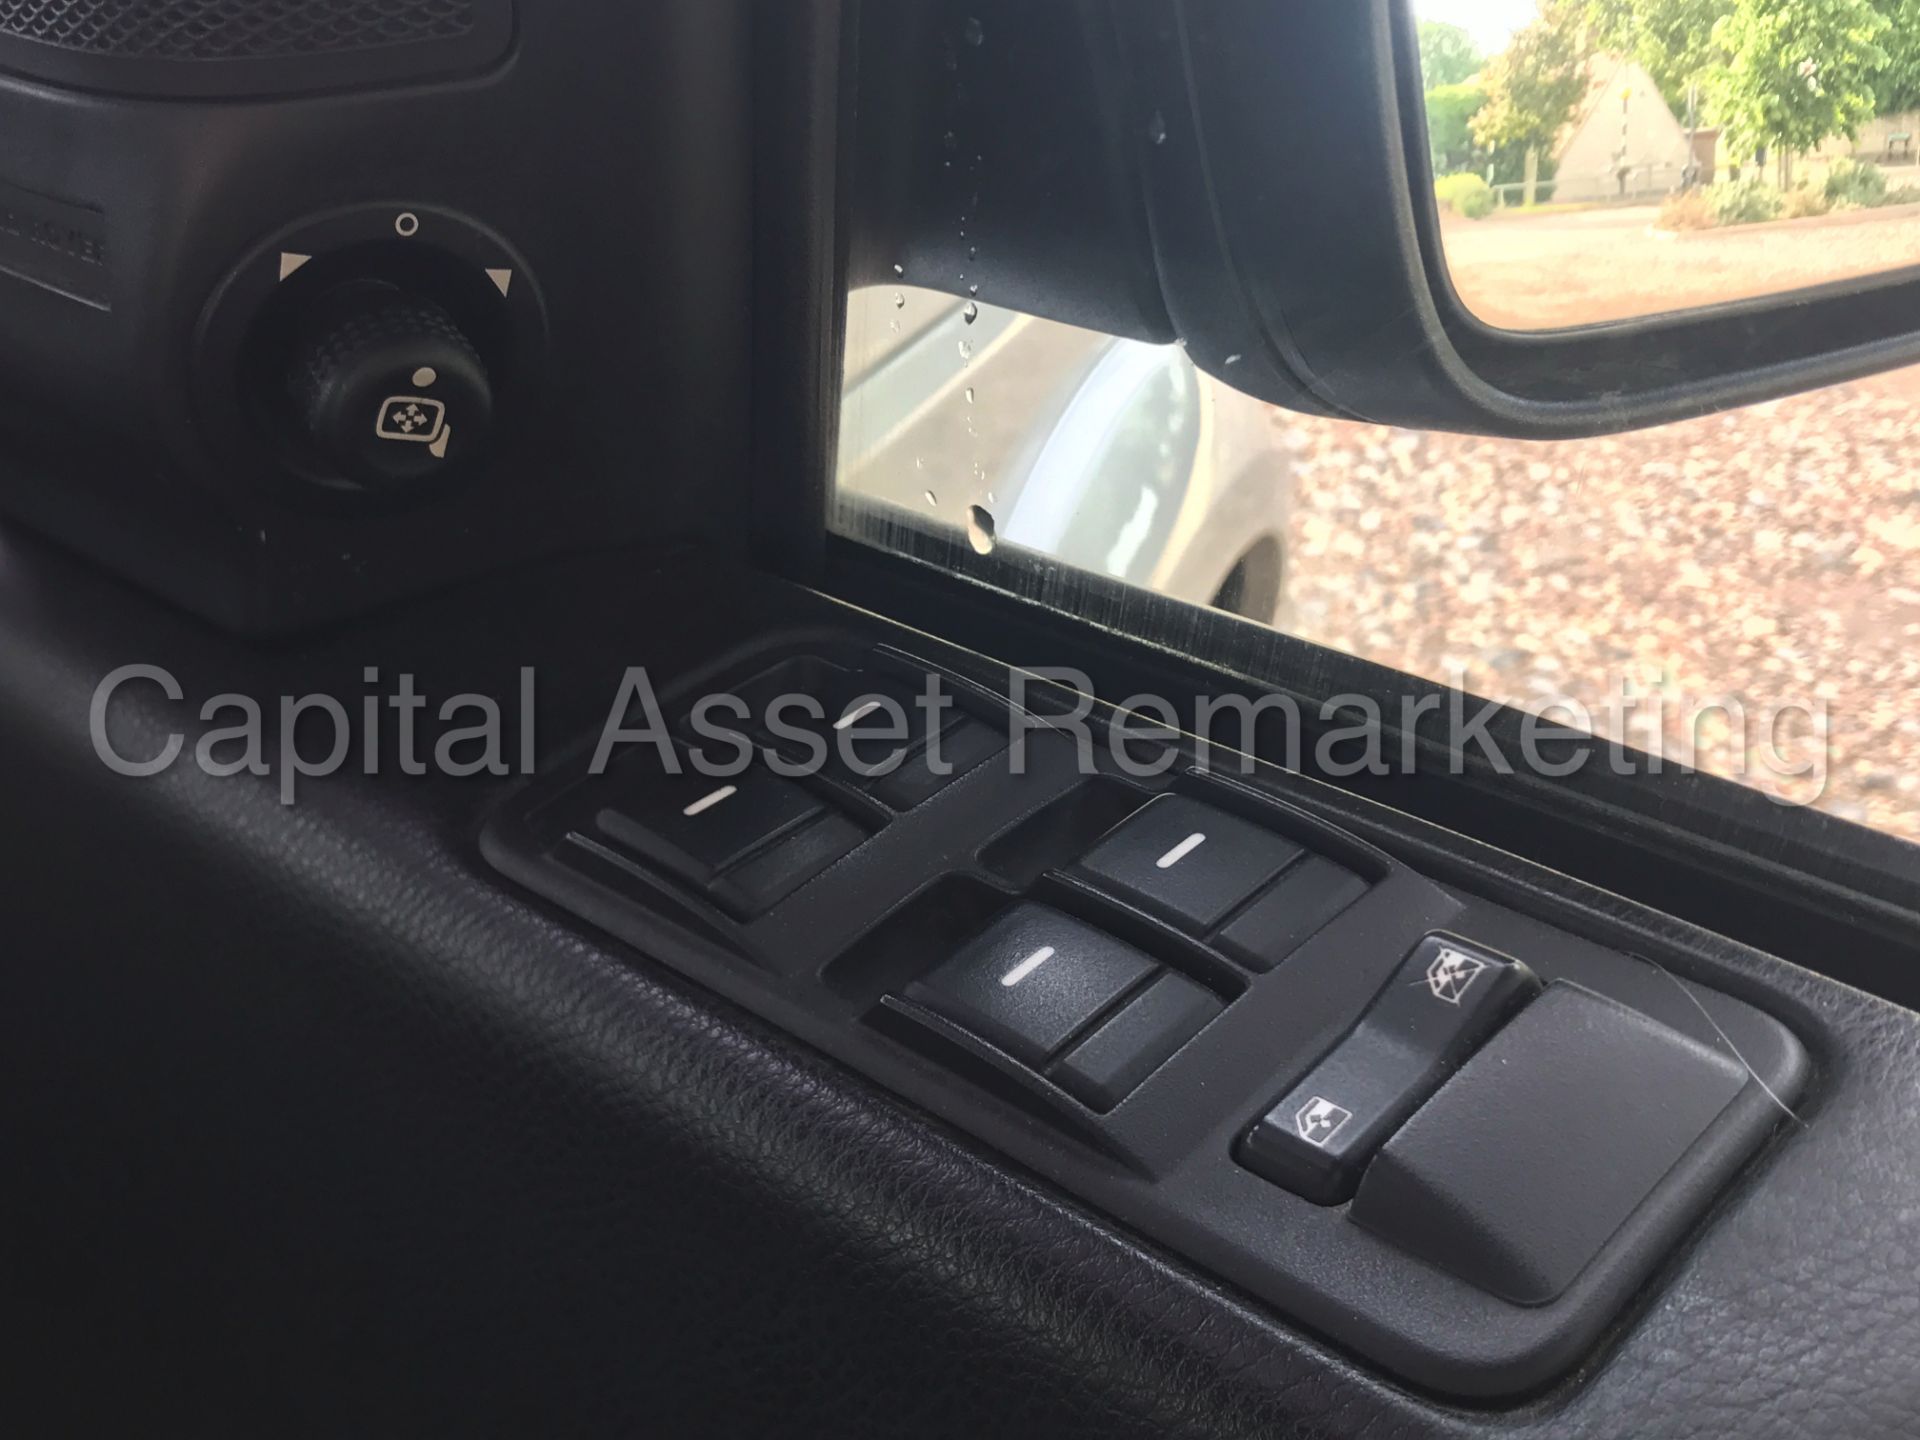 (On Sale) LAND ROVER DISCOVERY 3 (2009) 2.7 TDV6 - AUTO - 7 SEATER - AIR SUSPENSION (NO VAT) - Image 12 of 29